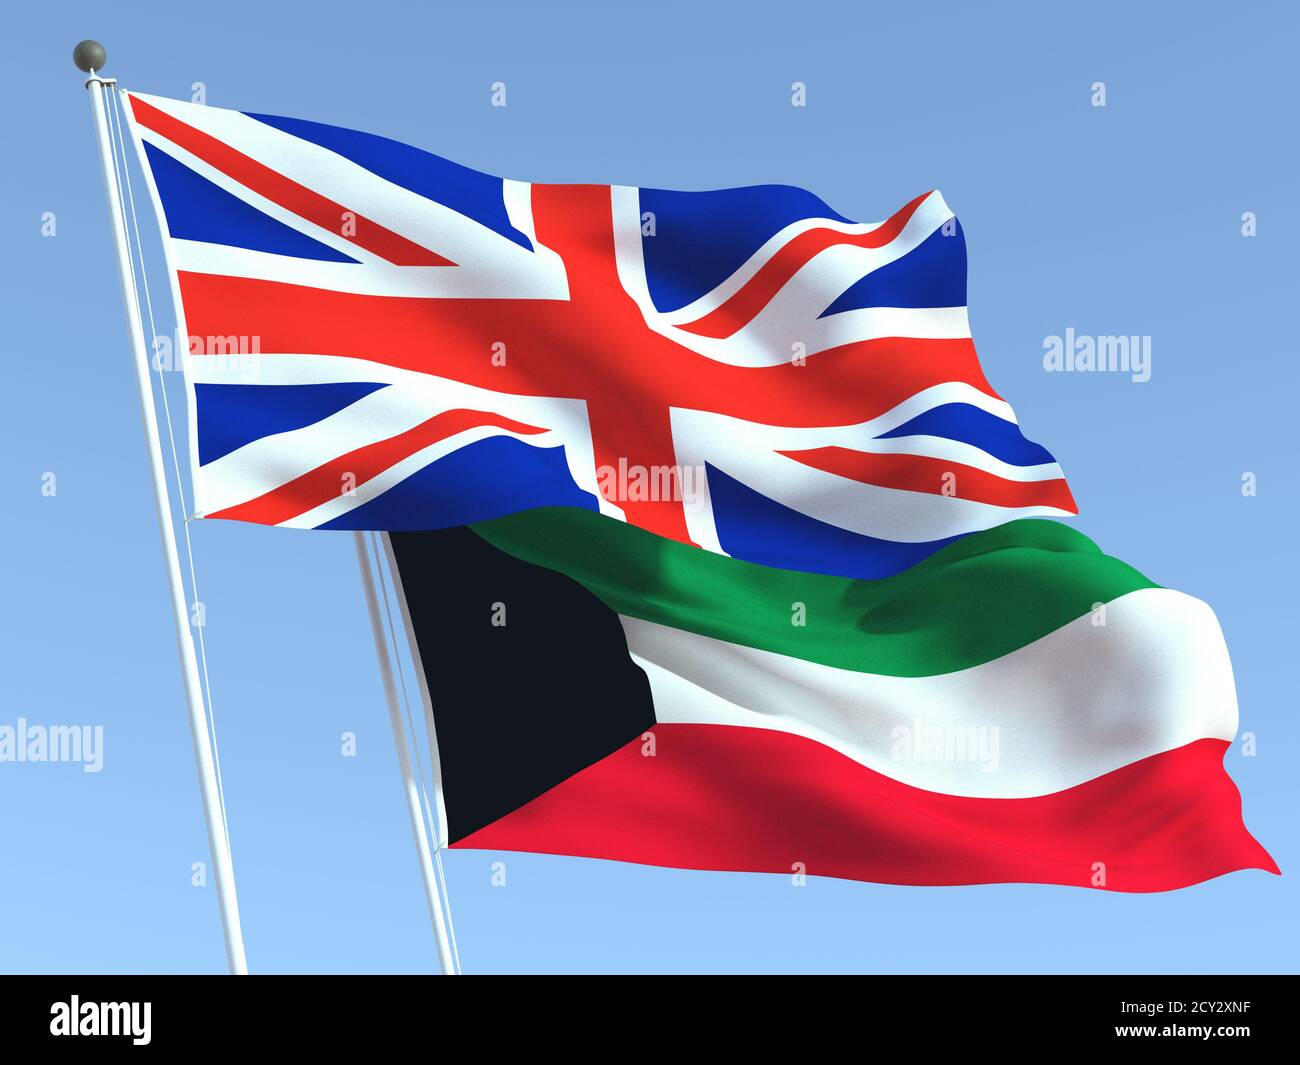 Two waving state flags of United Kingdom and Kuwait on the blue sky. High - quality business background. 3d illustration Stock Photo